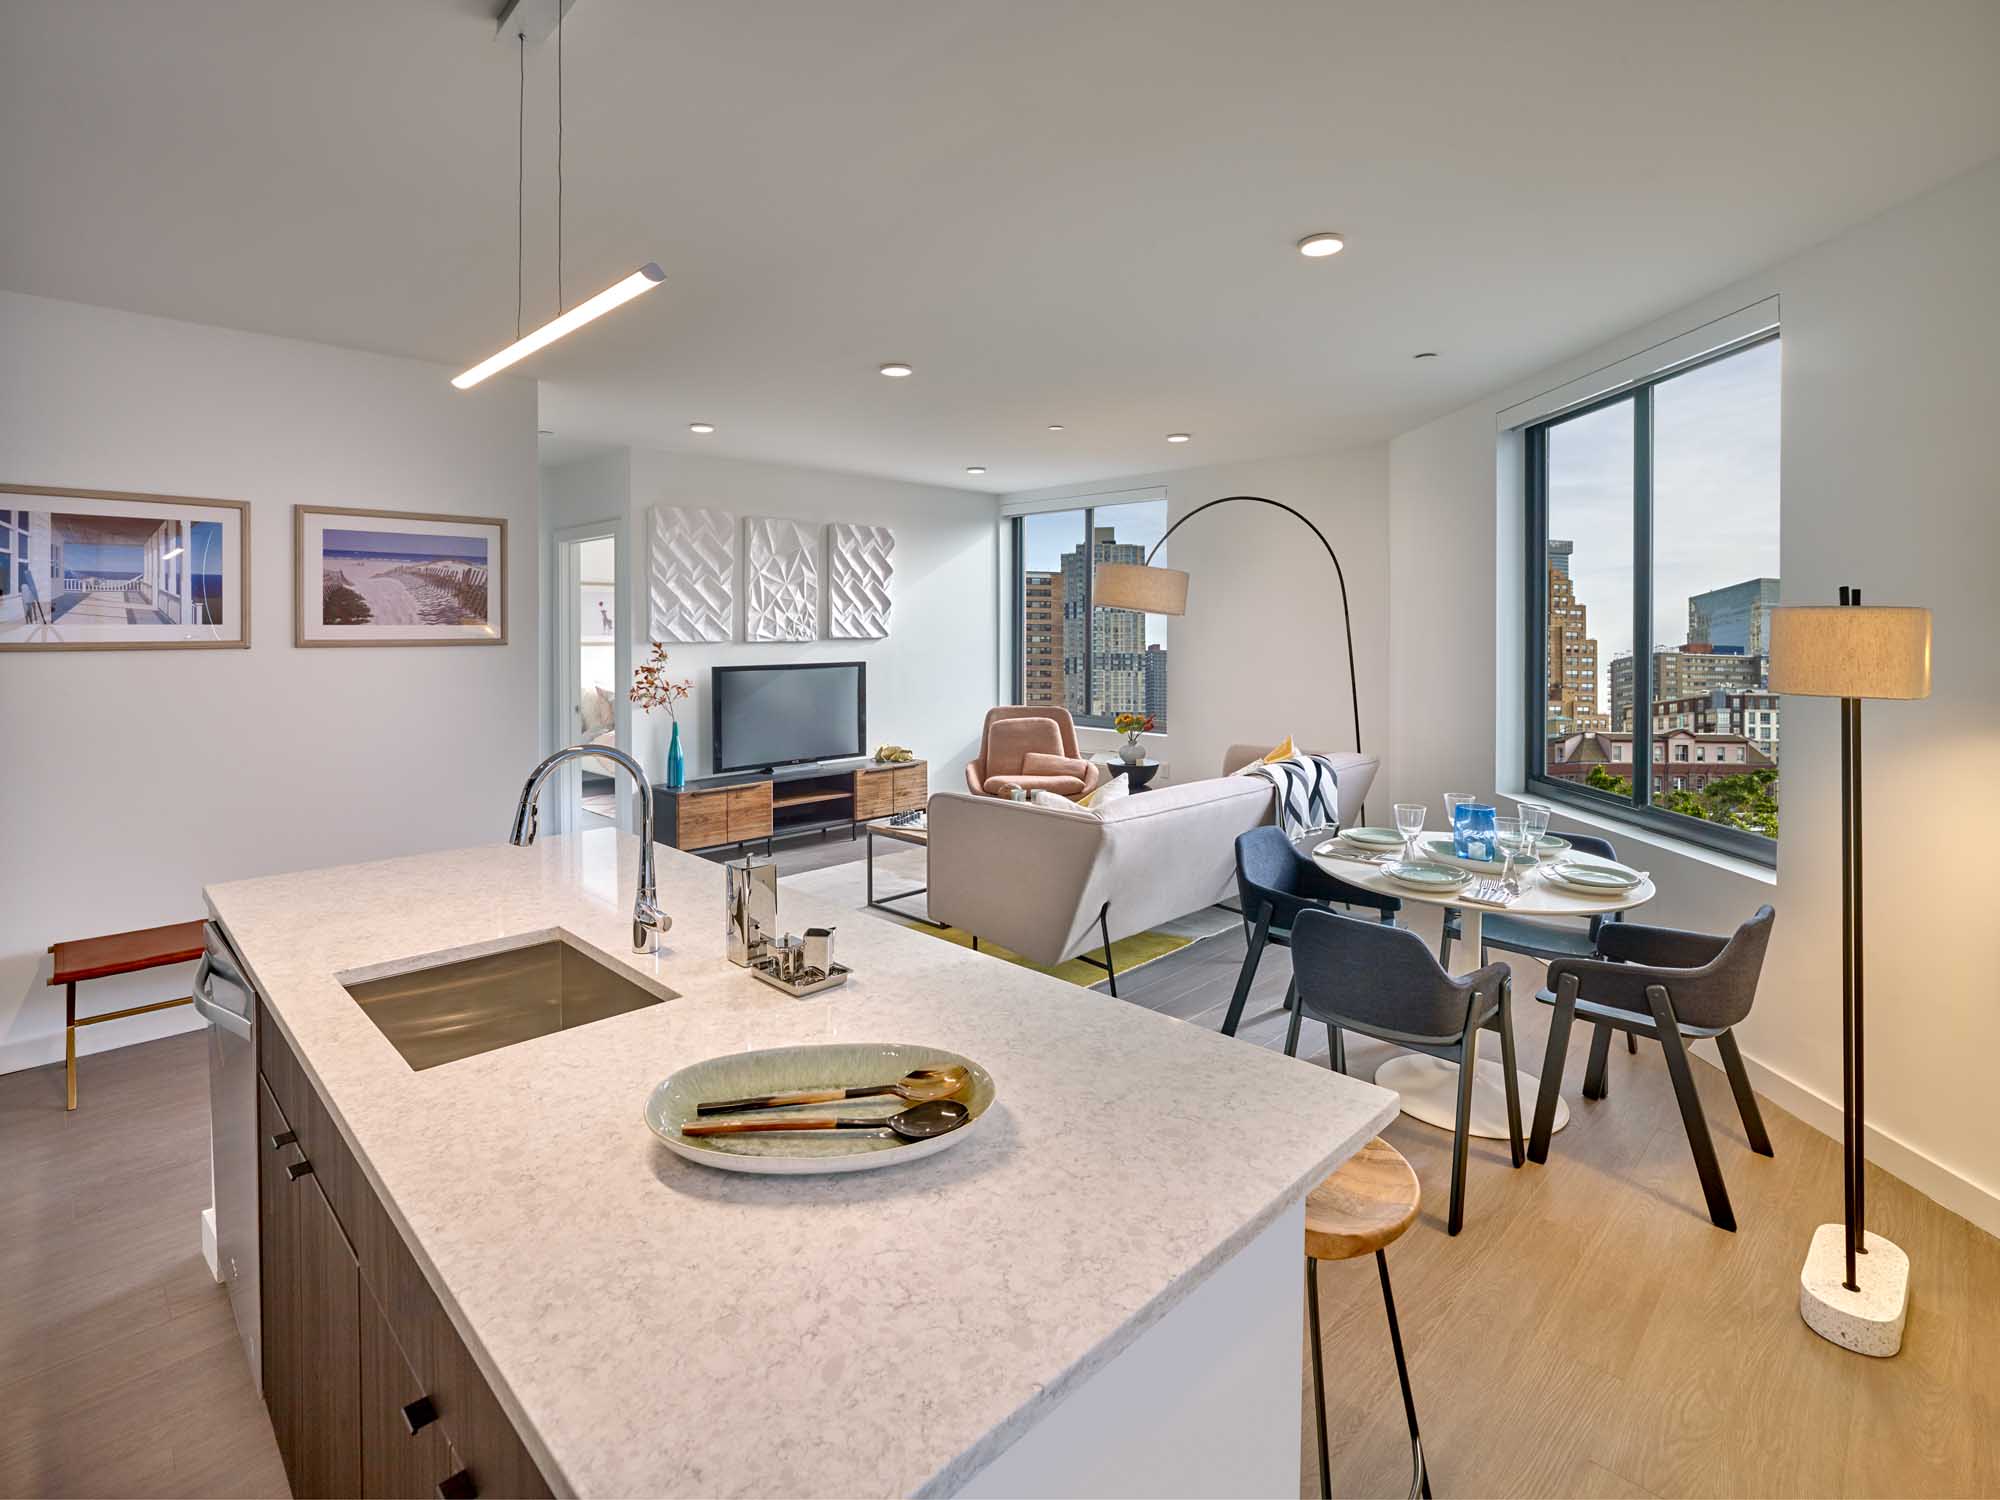 Open layout modern apartment staged with kitchen leading to living and dining areas, sink in island.